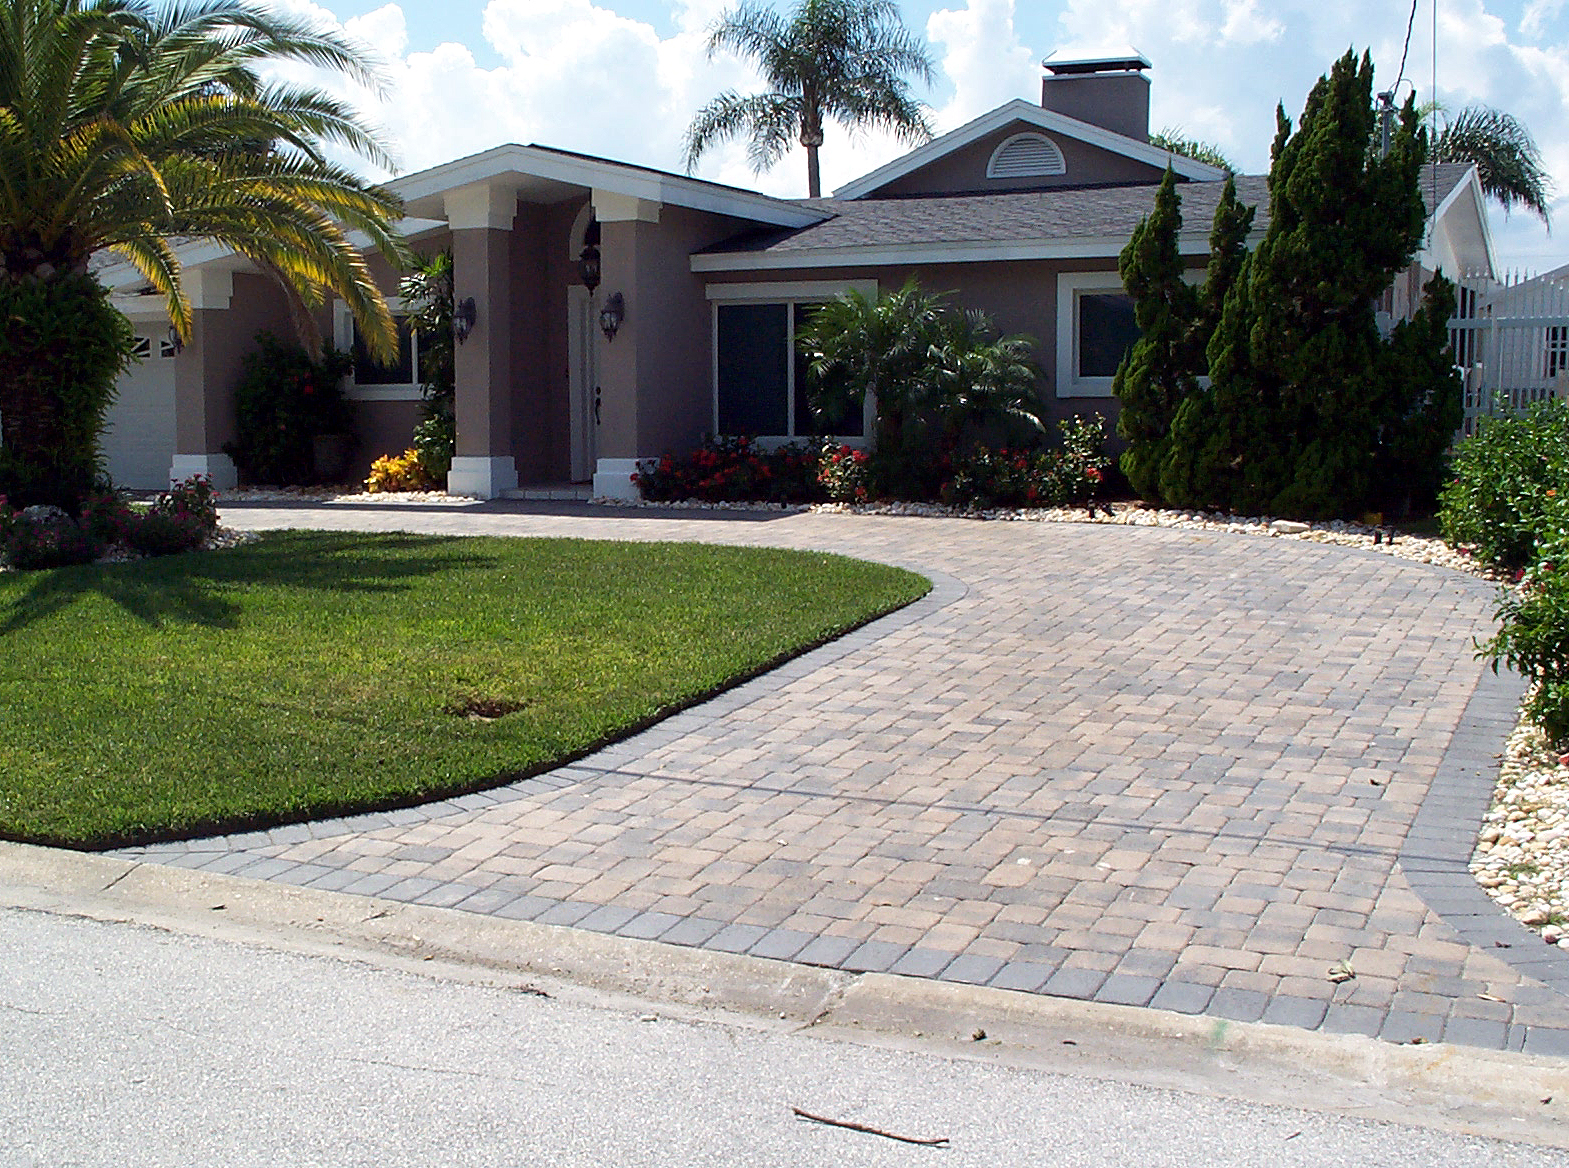 Brick driveway in residential area